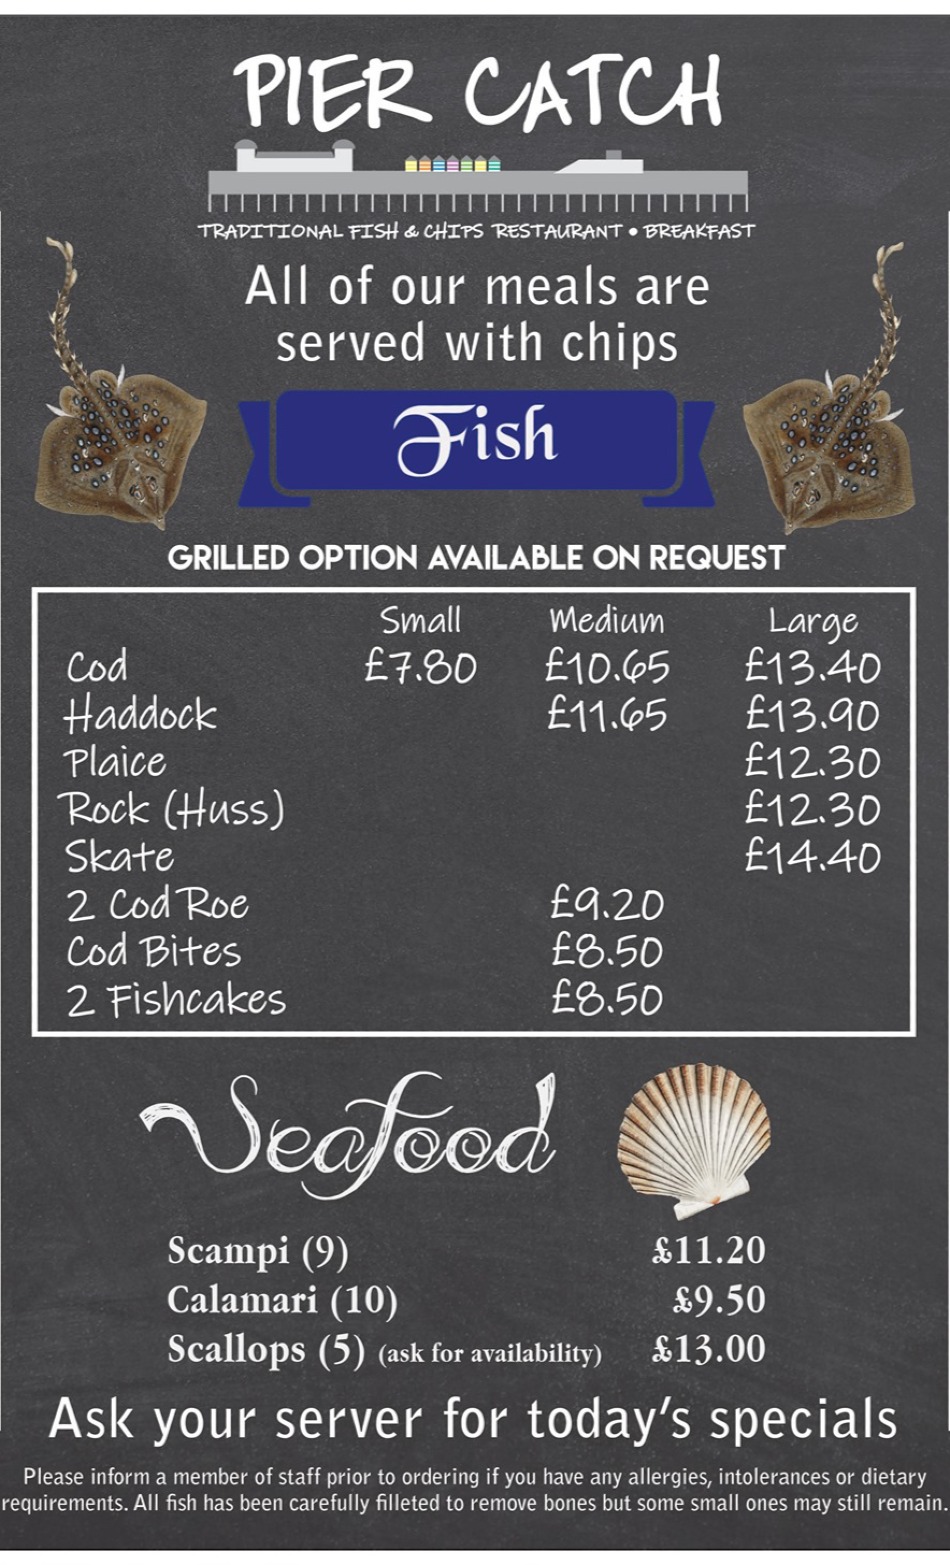 Takeaway Restaurant Menu Page - PIER CATCH Fish and chips restaurant - Hastings